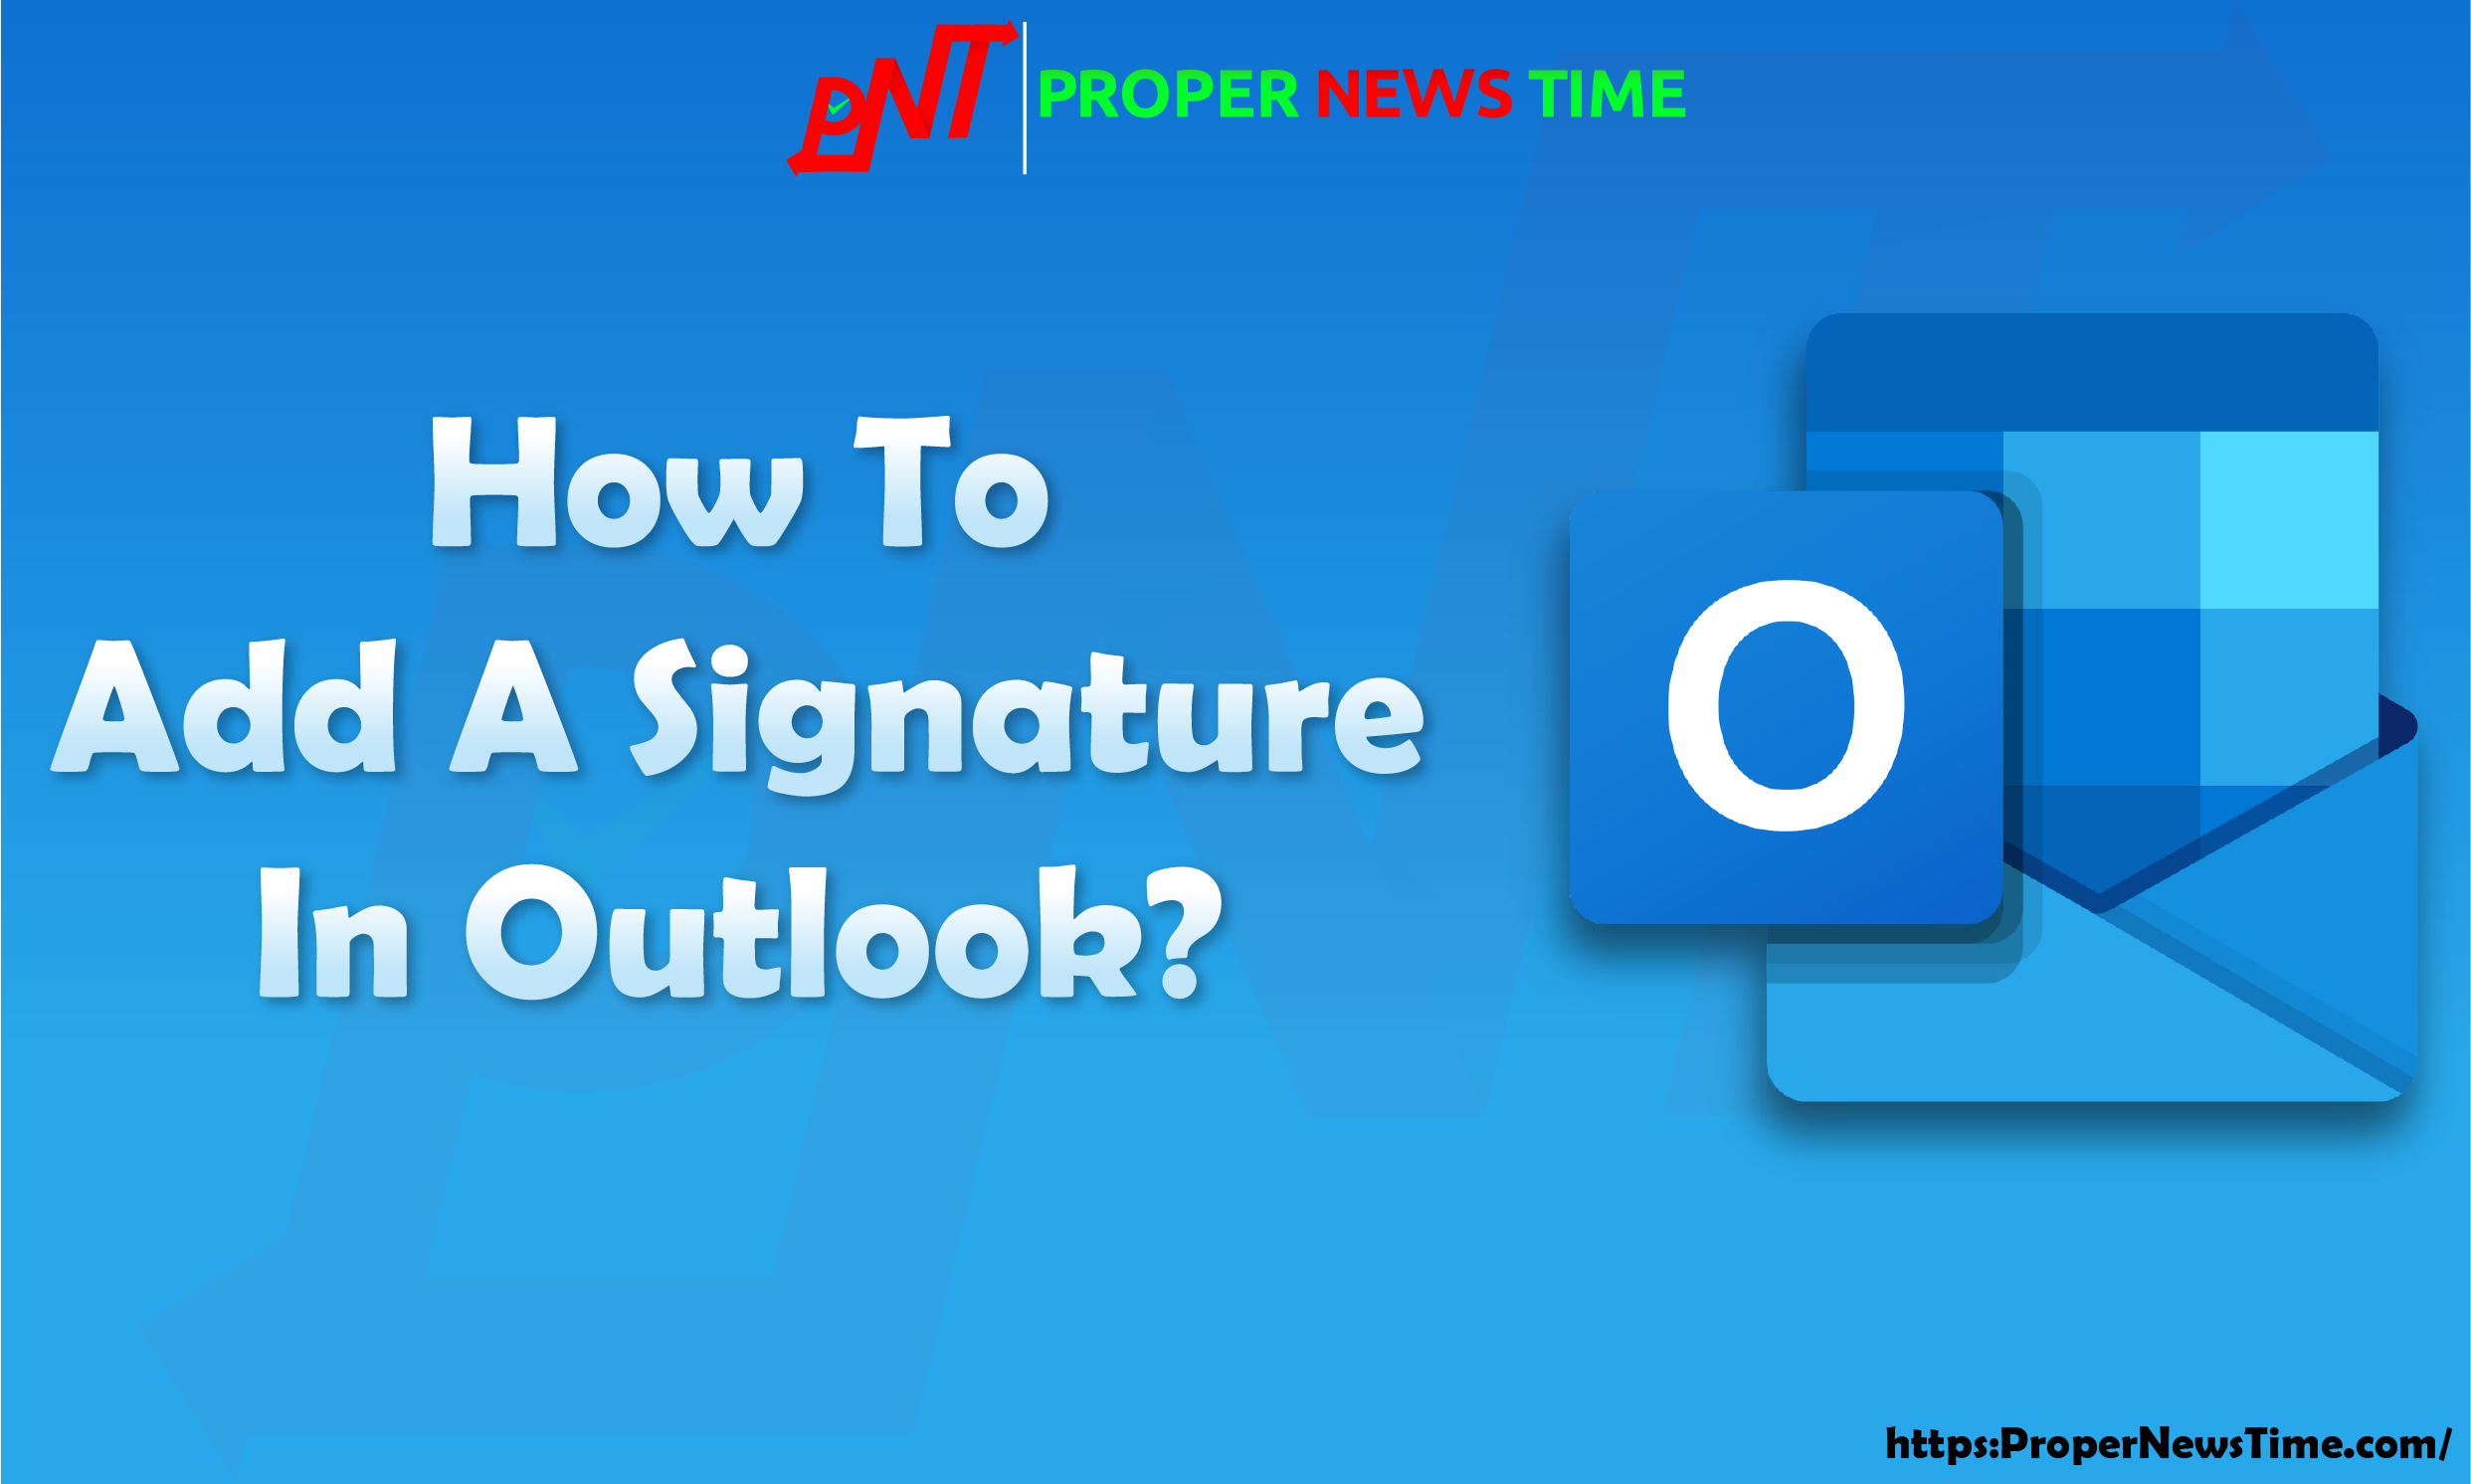 How to Add a Signature in Outlook